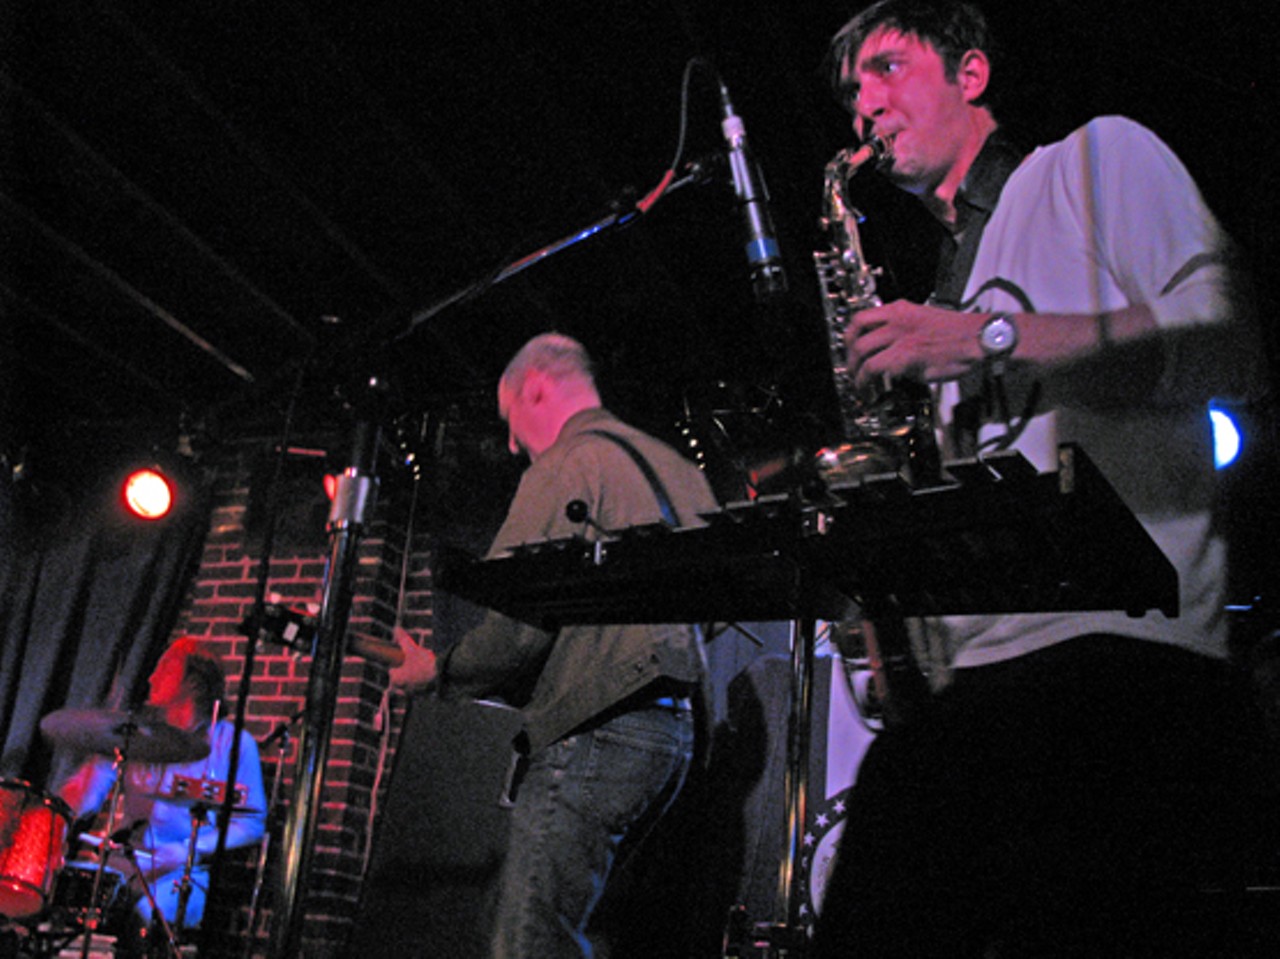 Jamin Barton plays saxophone during the Stoltz set. Barton later went on to play quite possibly the only theremin solo heard in the metro area on March 18.